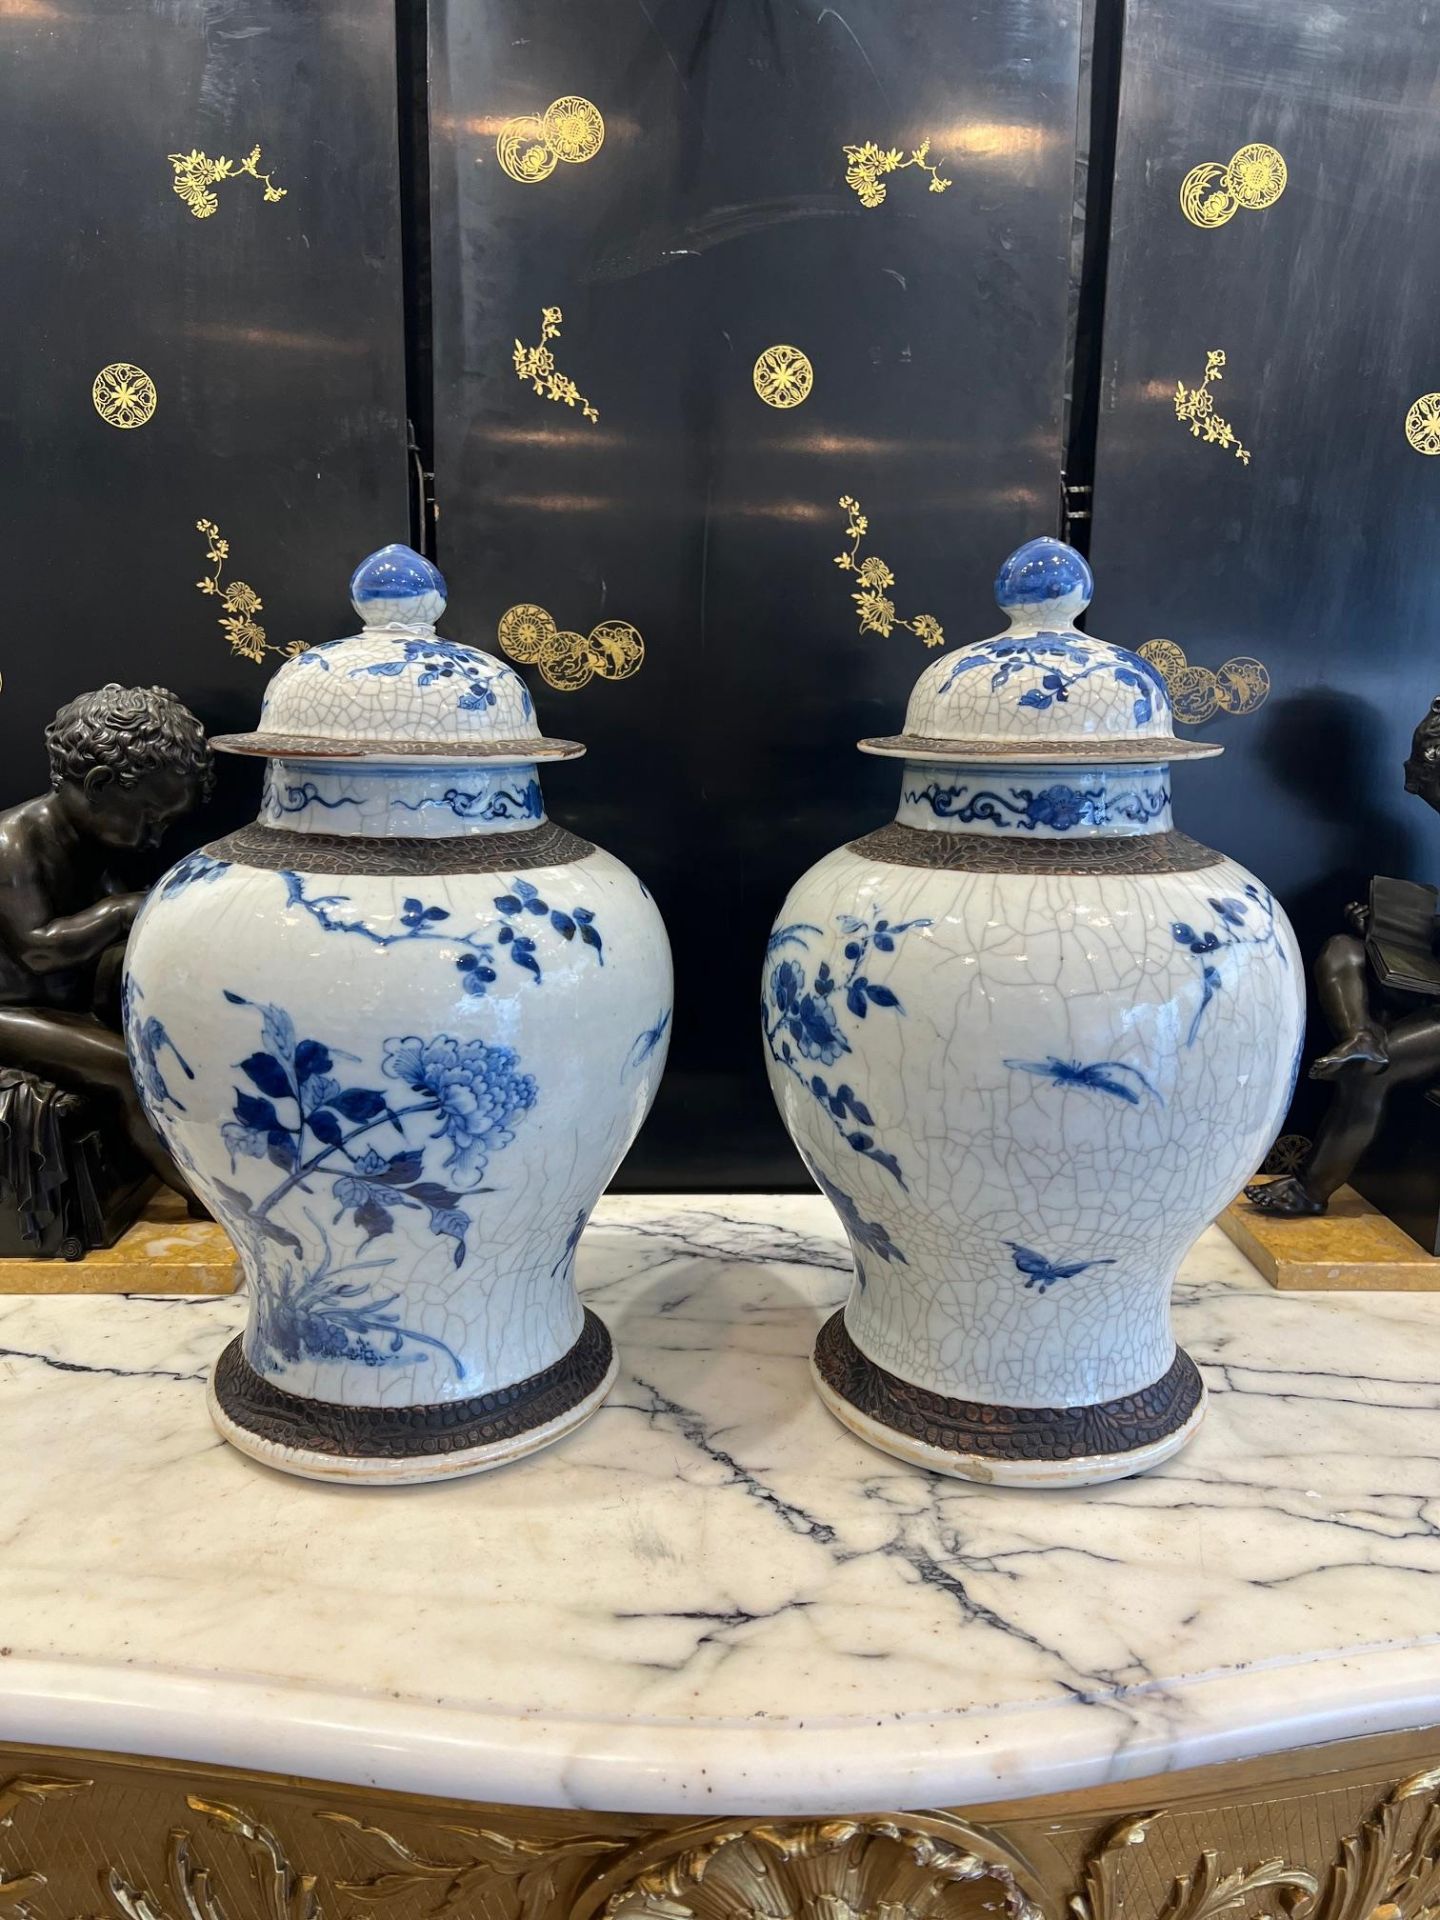 A LARGE PAIR OF 19TH CENTURY CHINESE CRACKLE GLAZED PORCELAIN VASES AND COVERS - Image 8 of 10